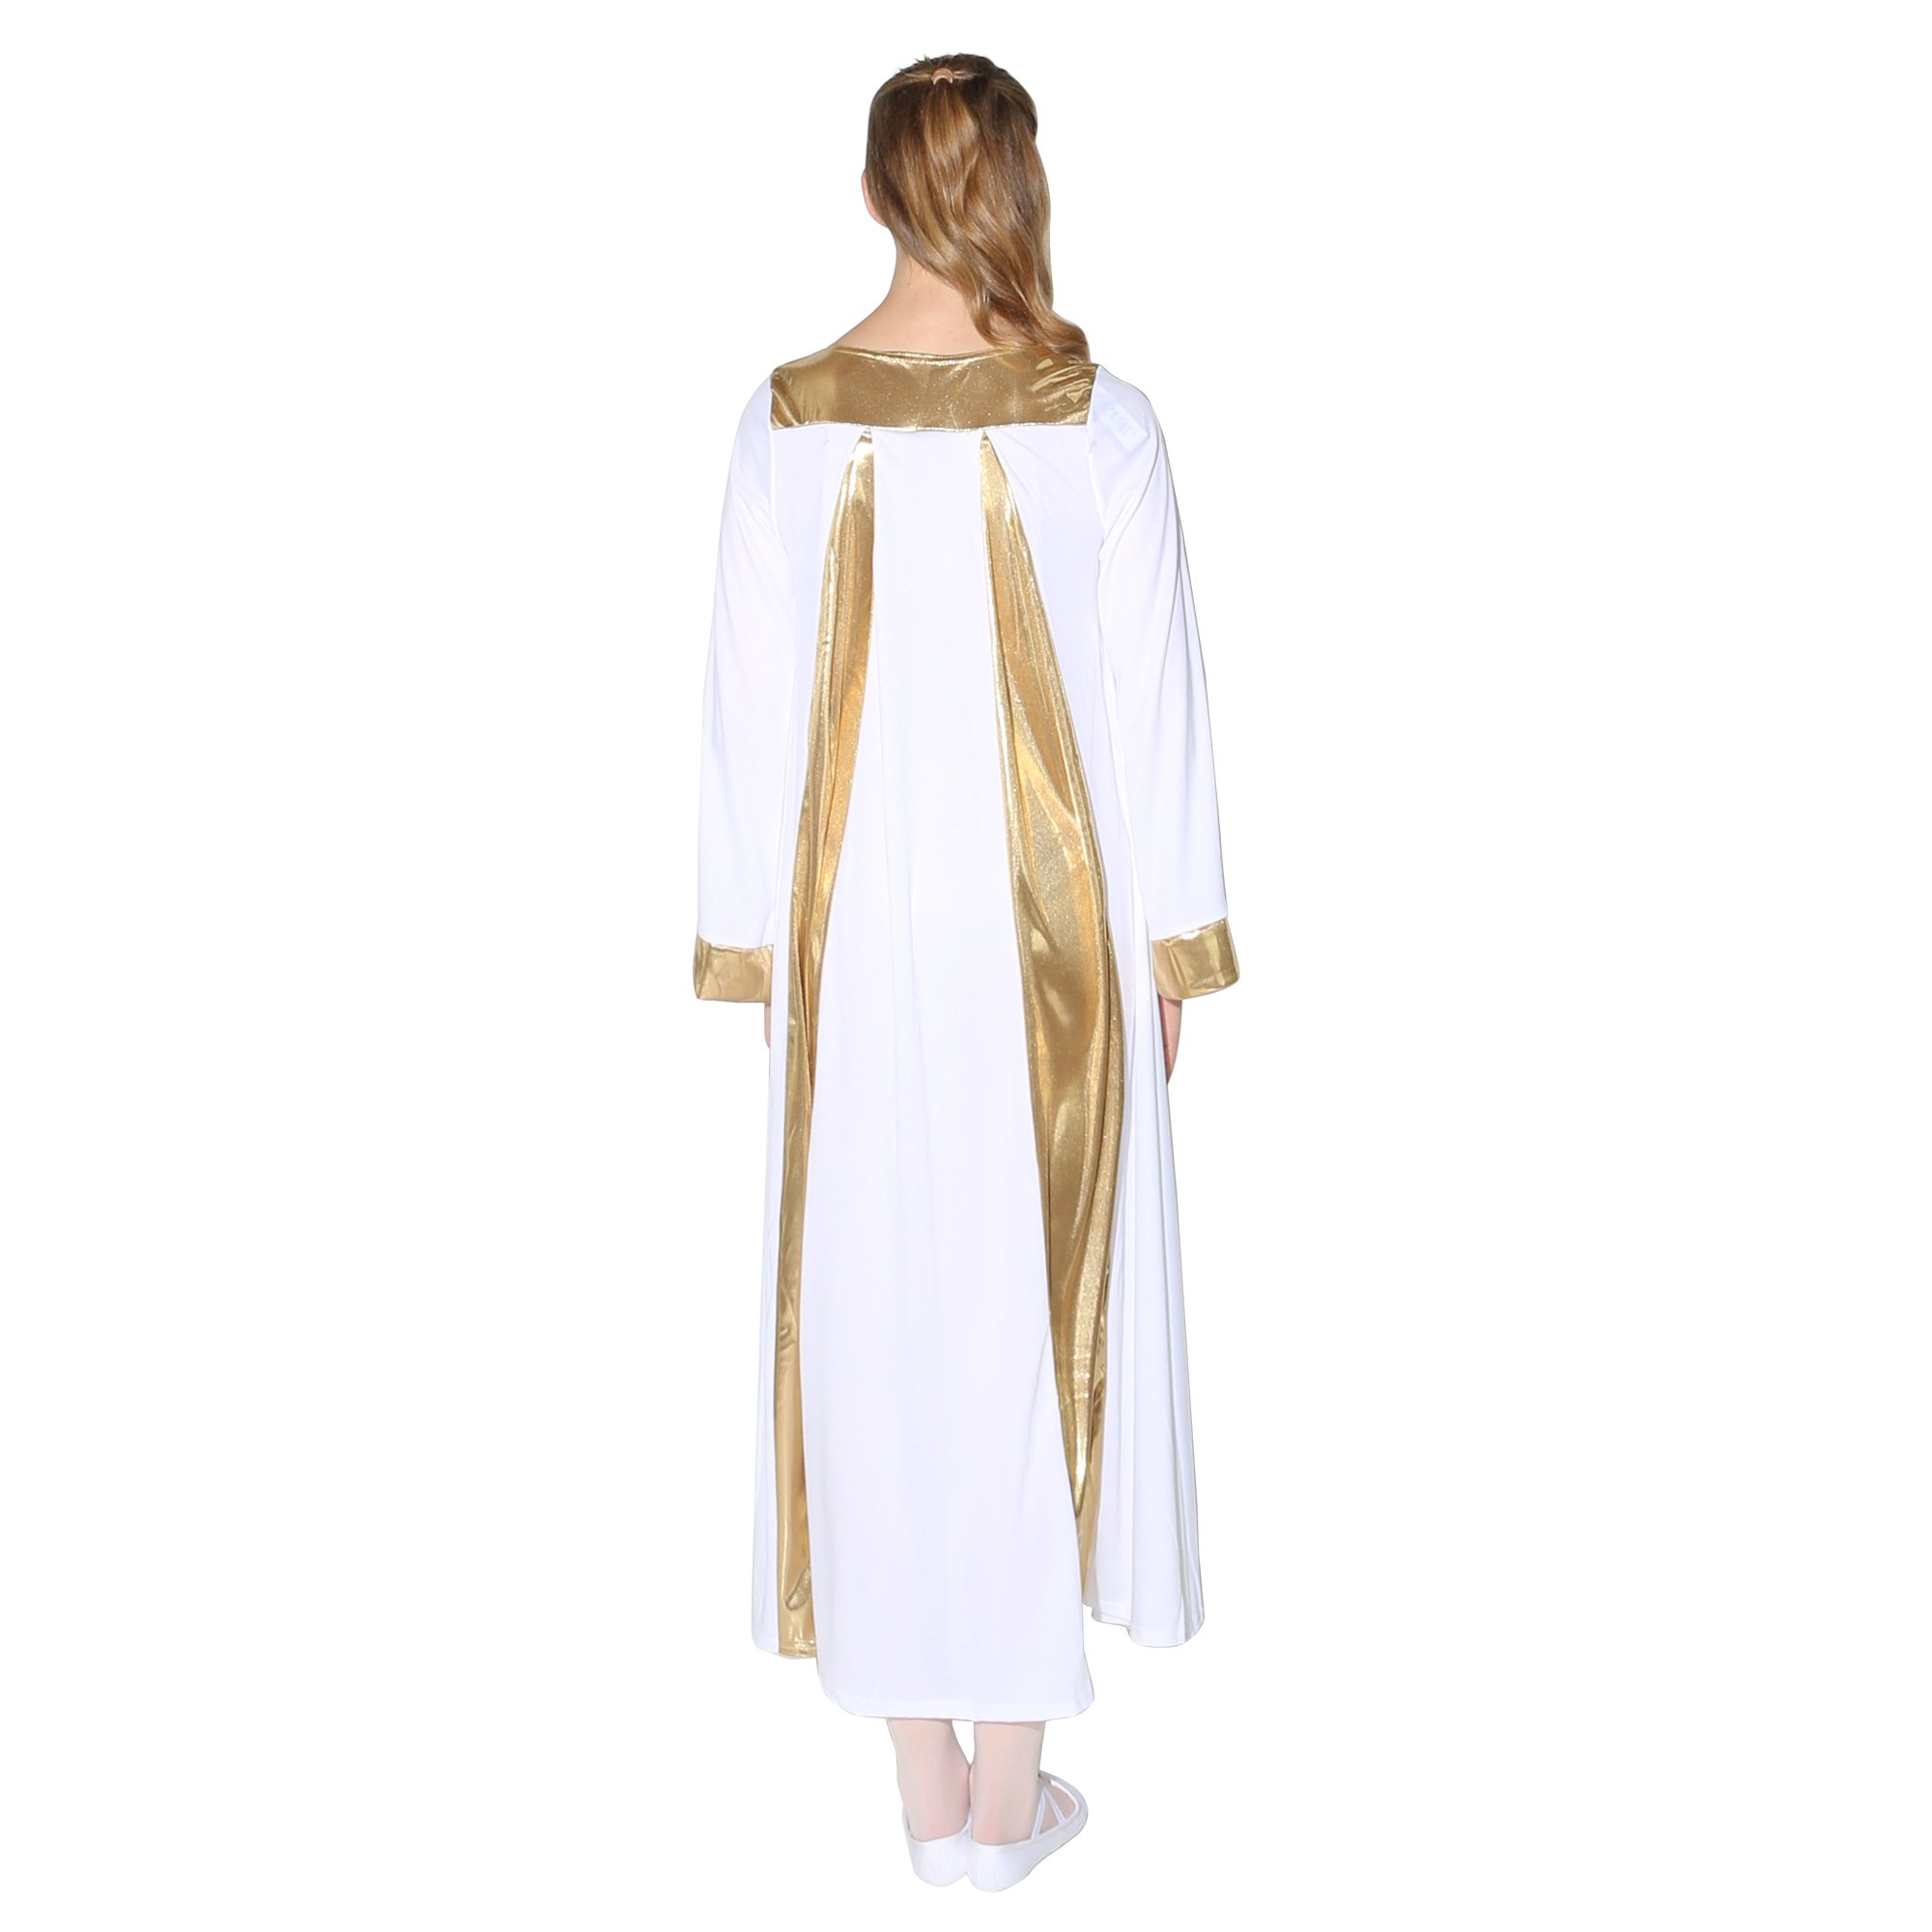 Danzcue Praise Shimmery Long Sleeve Dress - Click Image to Close